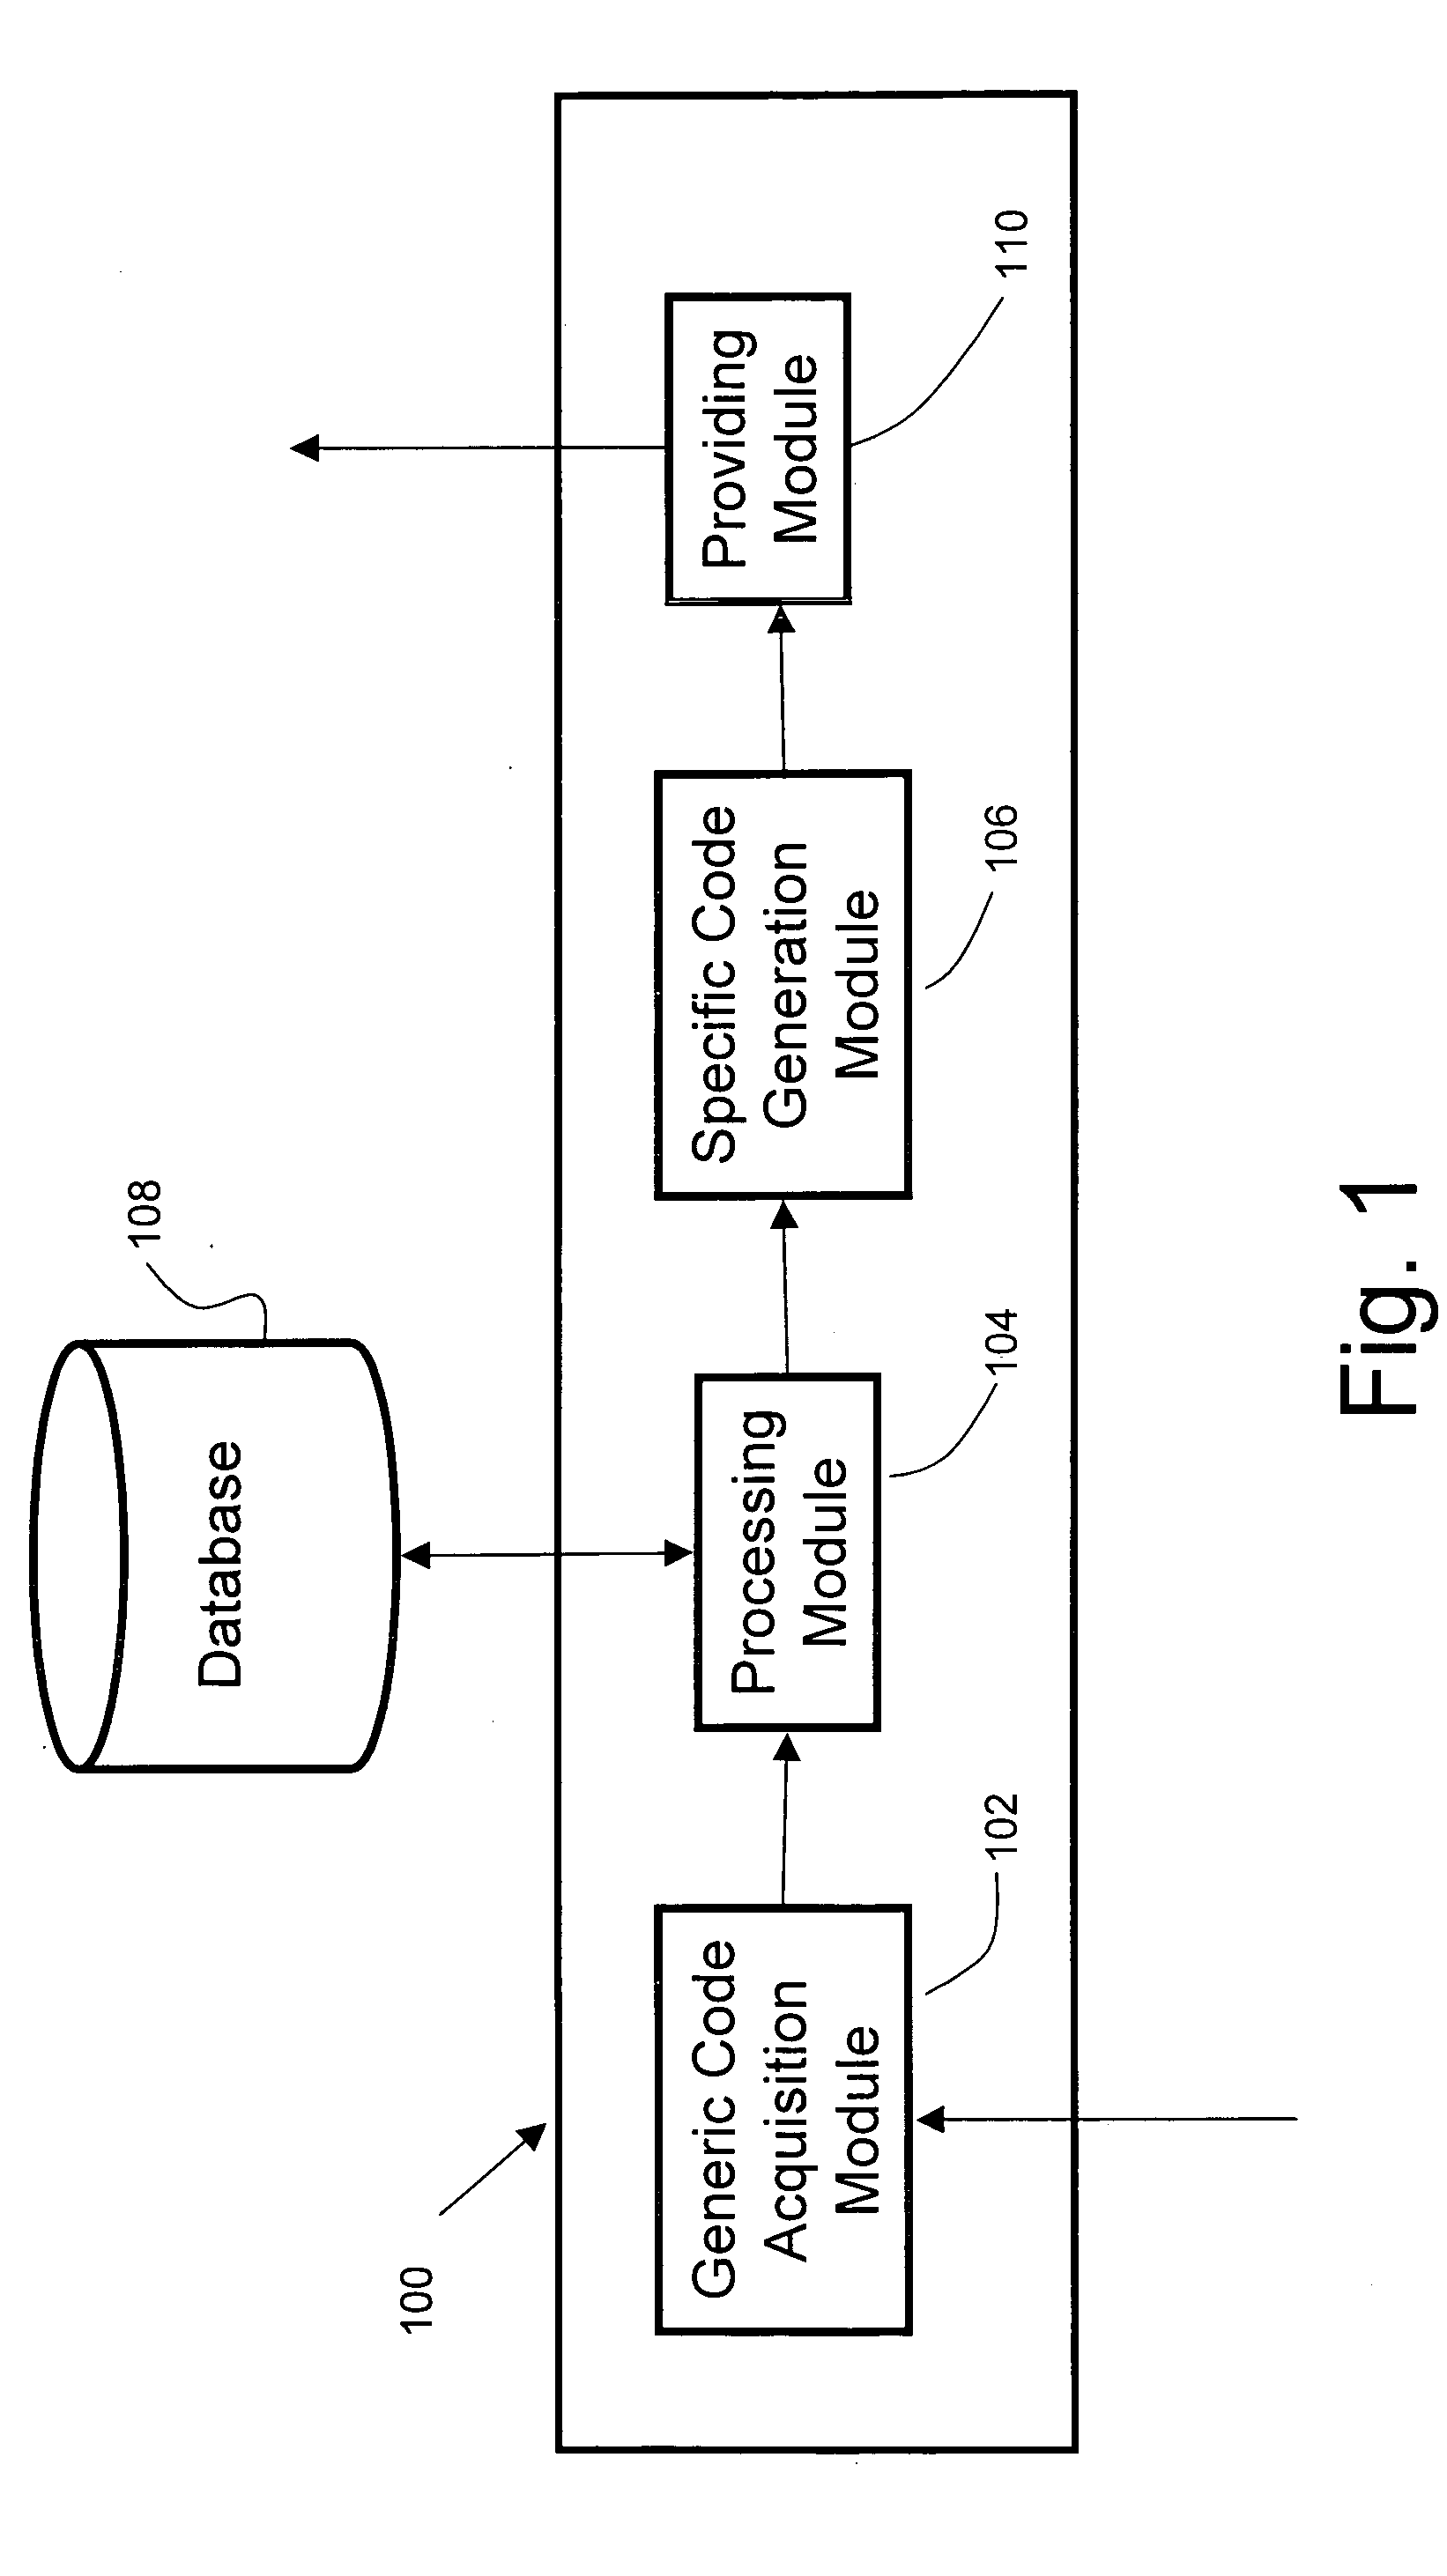 System and method for transforming generic software code into operator specific code